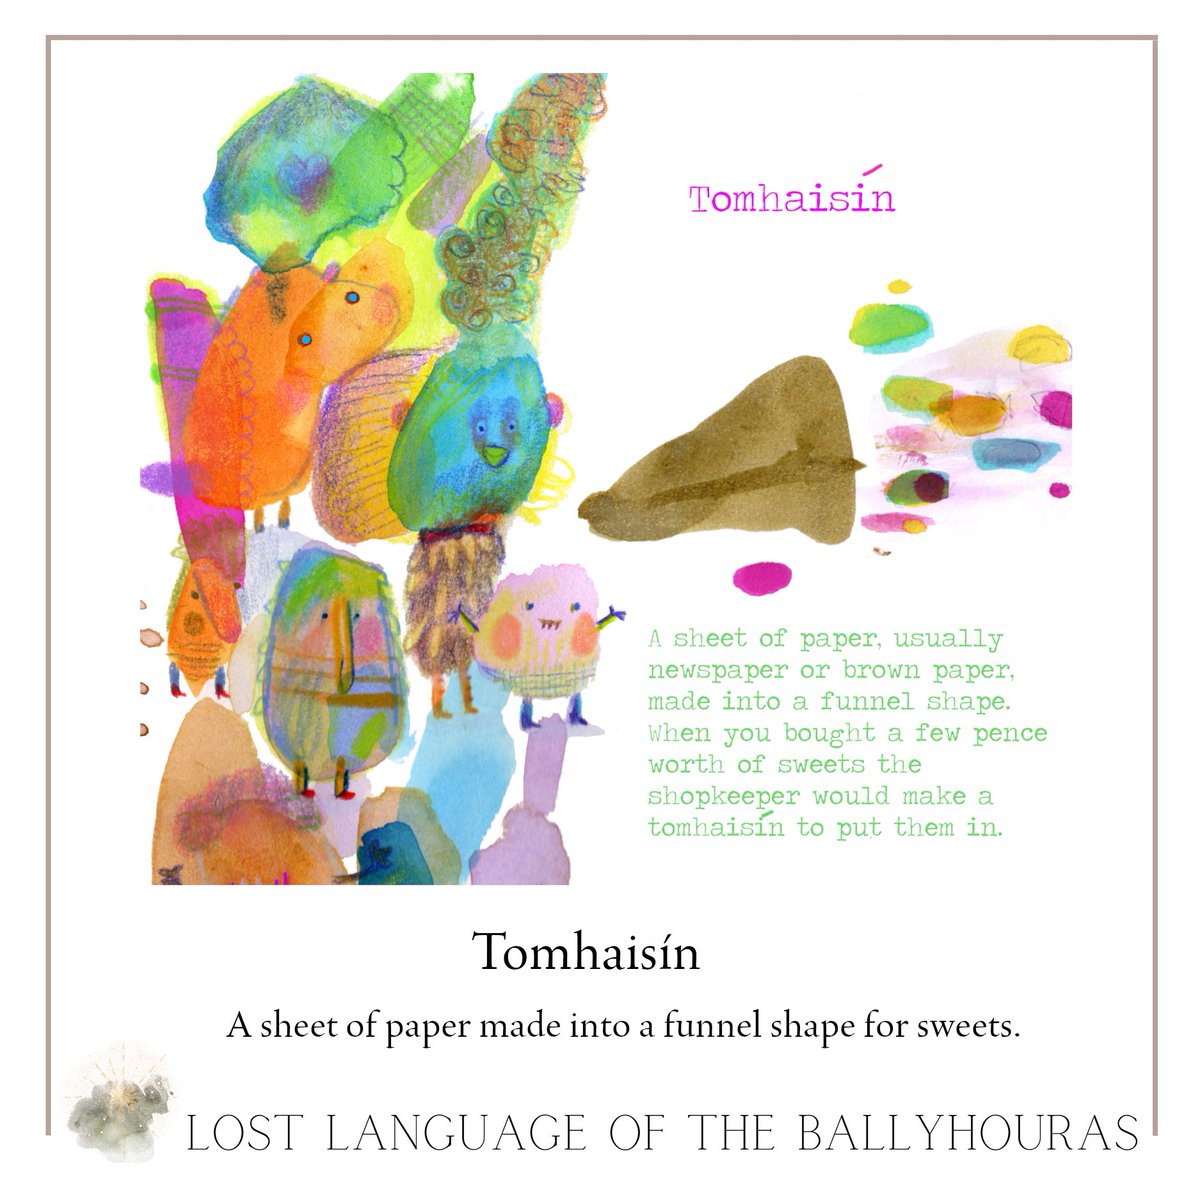 TOMHAISÍN (pro. toe-sheen)
A sheet of paper made into a funnel shape. When you bought  sweets the shopkeeper would make a tomhaisín to put them in.

Illustration: @corrinaaskin 

Words from The Lost Language of the Ballyhouras: Cnuasach Focal Paddy Fennessy.